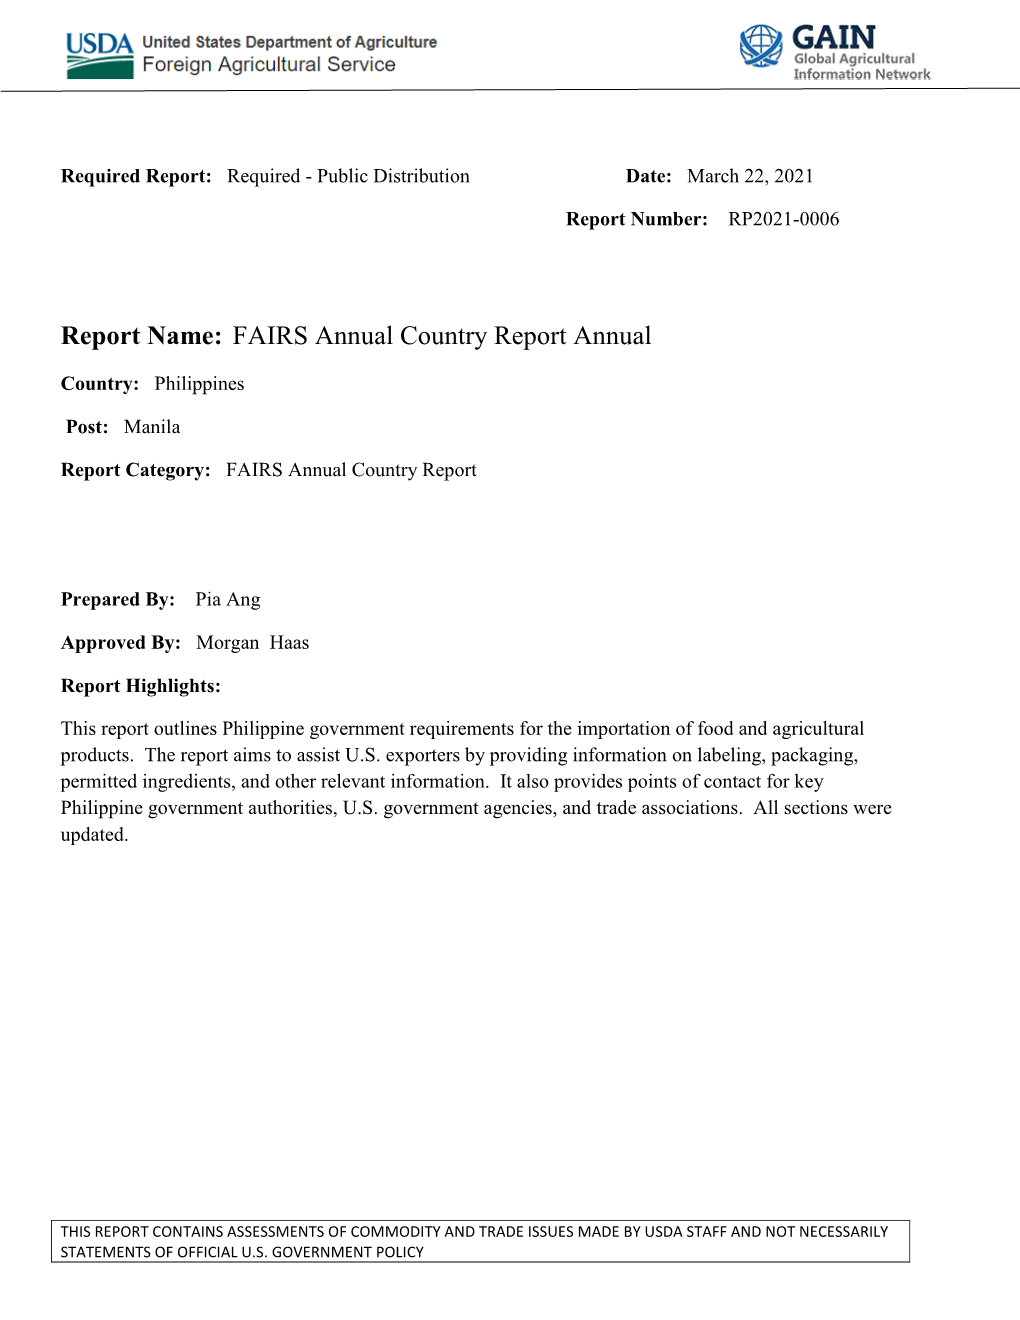 Report Name: FAIRS Annual Country Report Annual